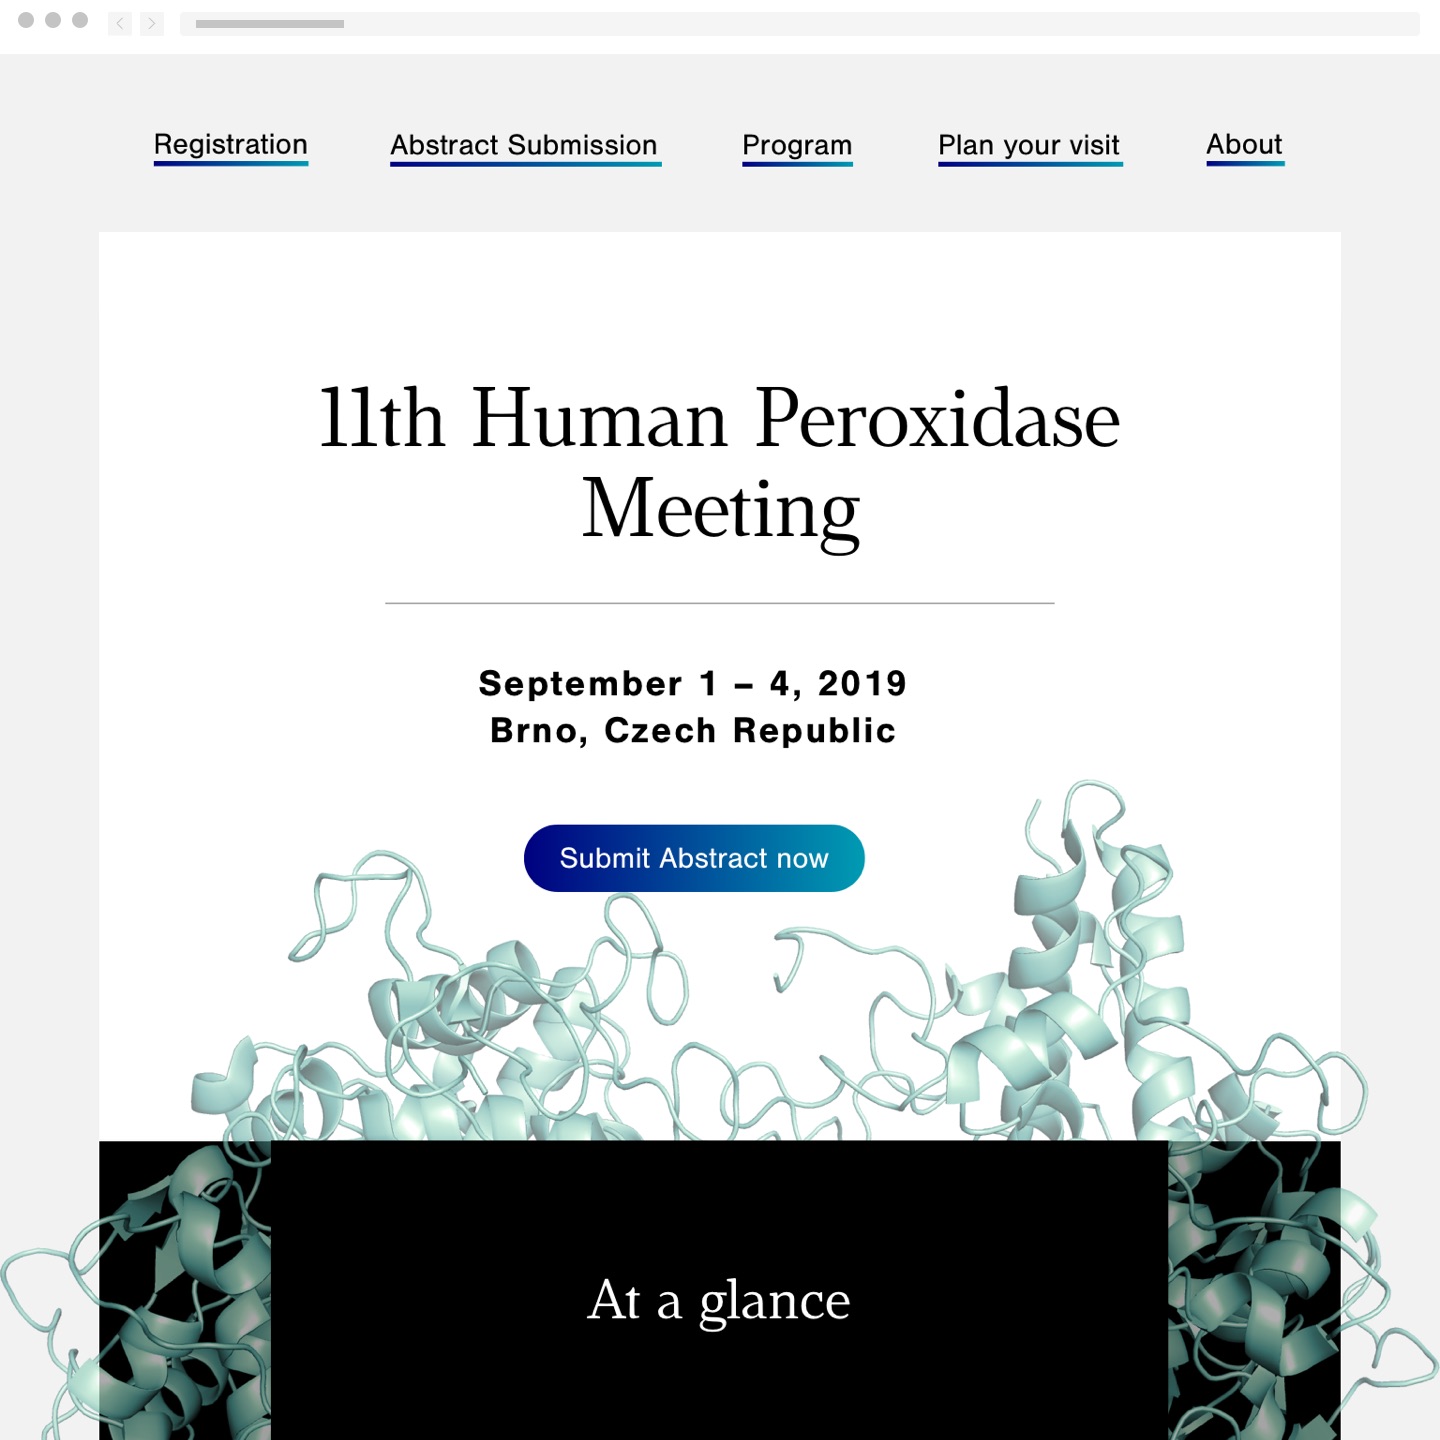 Homepage design for the 11th Human Peroxidase Meeting